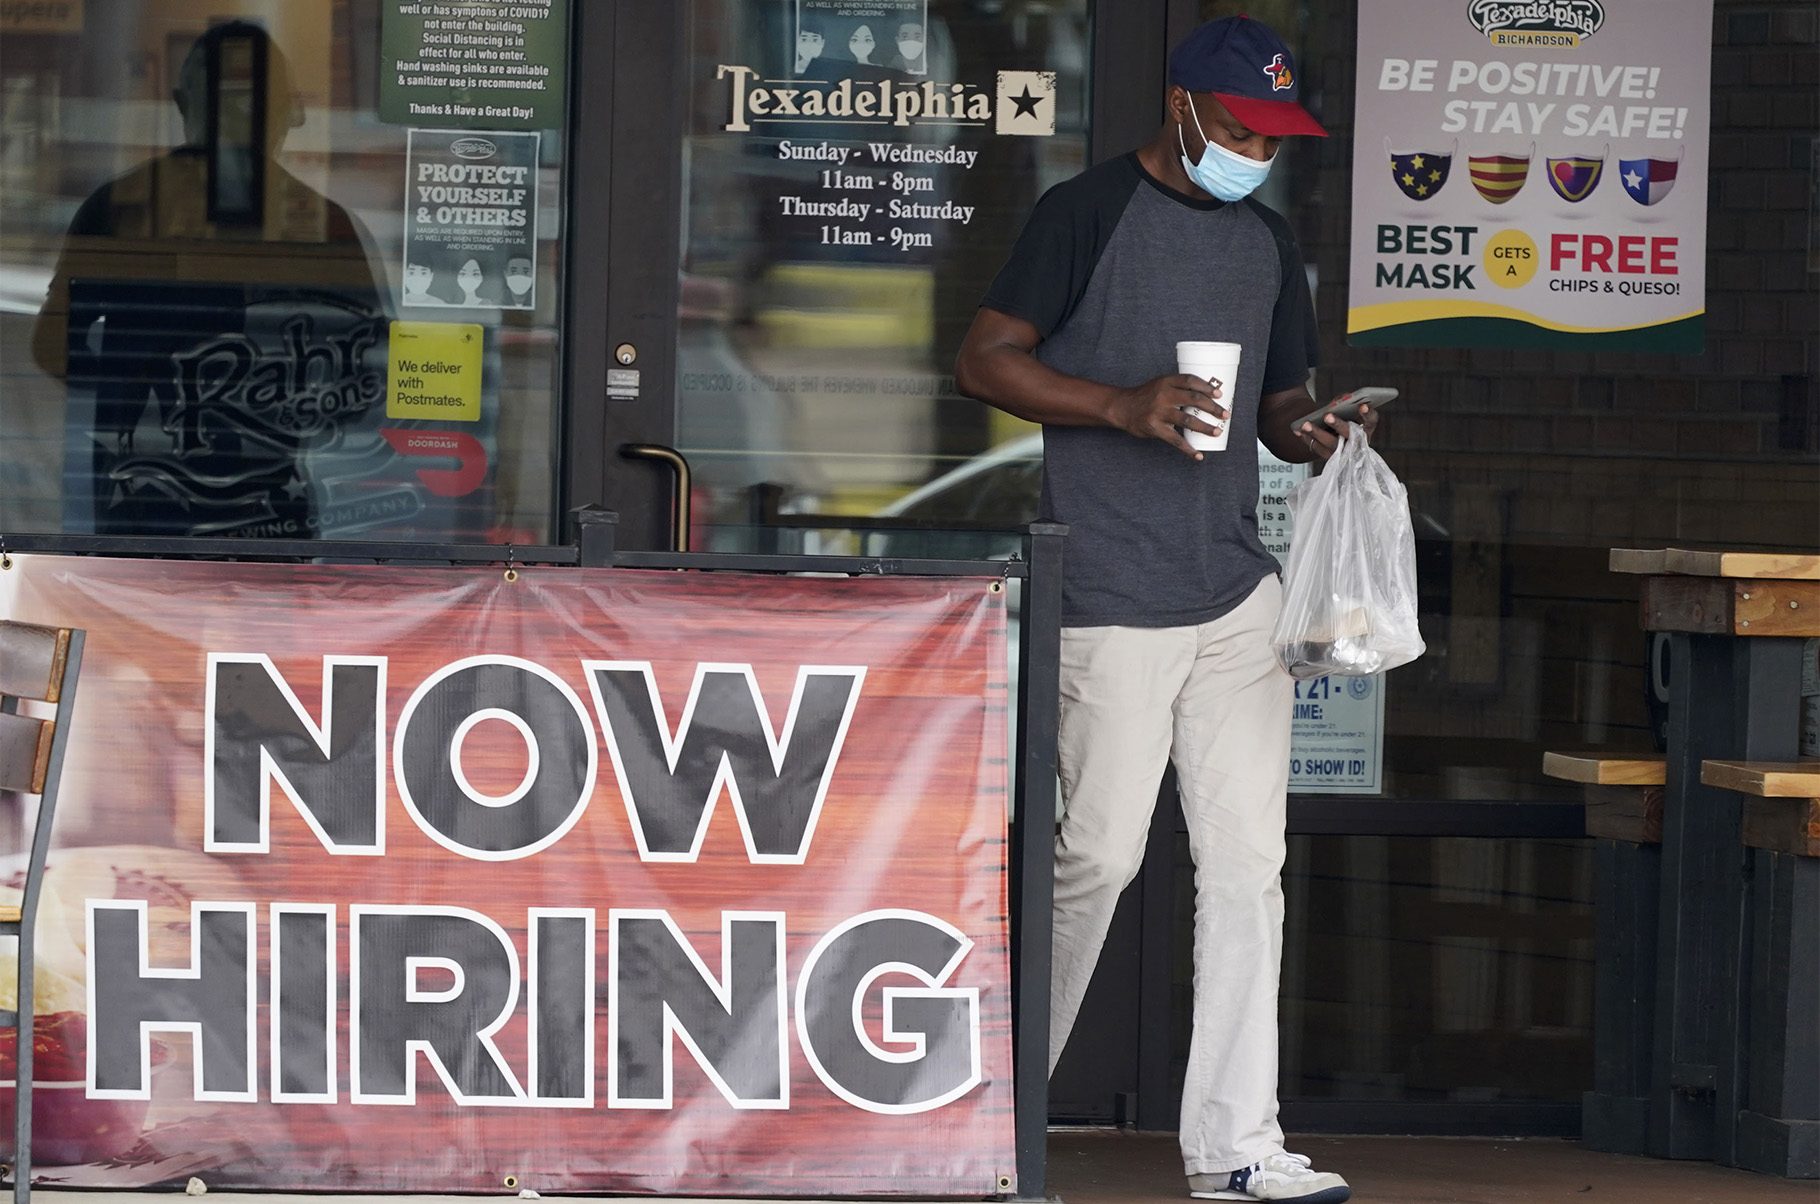 20 States Borrow From Feds to Pay Unemployment Benefits | The Pew  Charitable Trusts